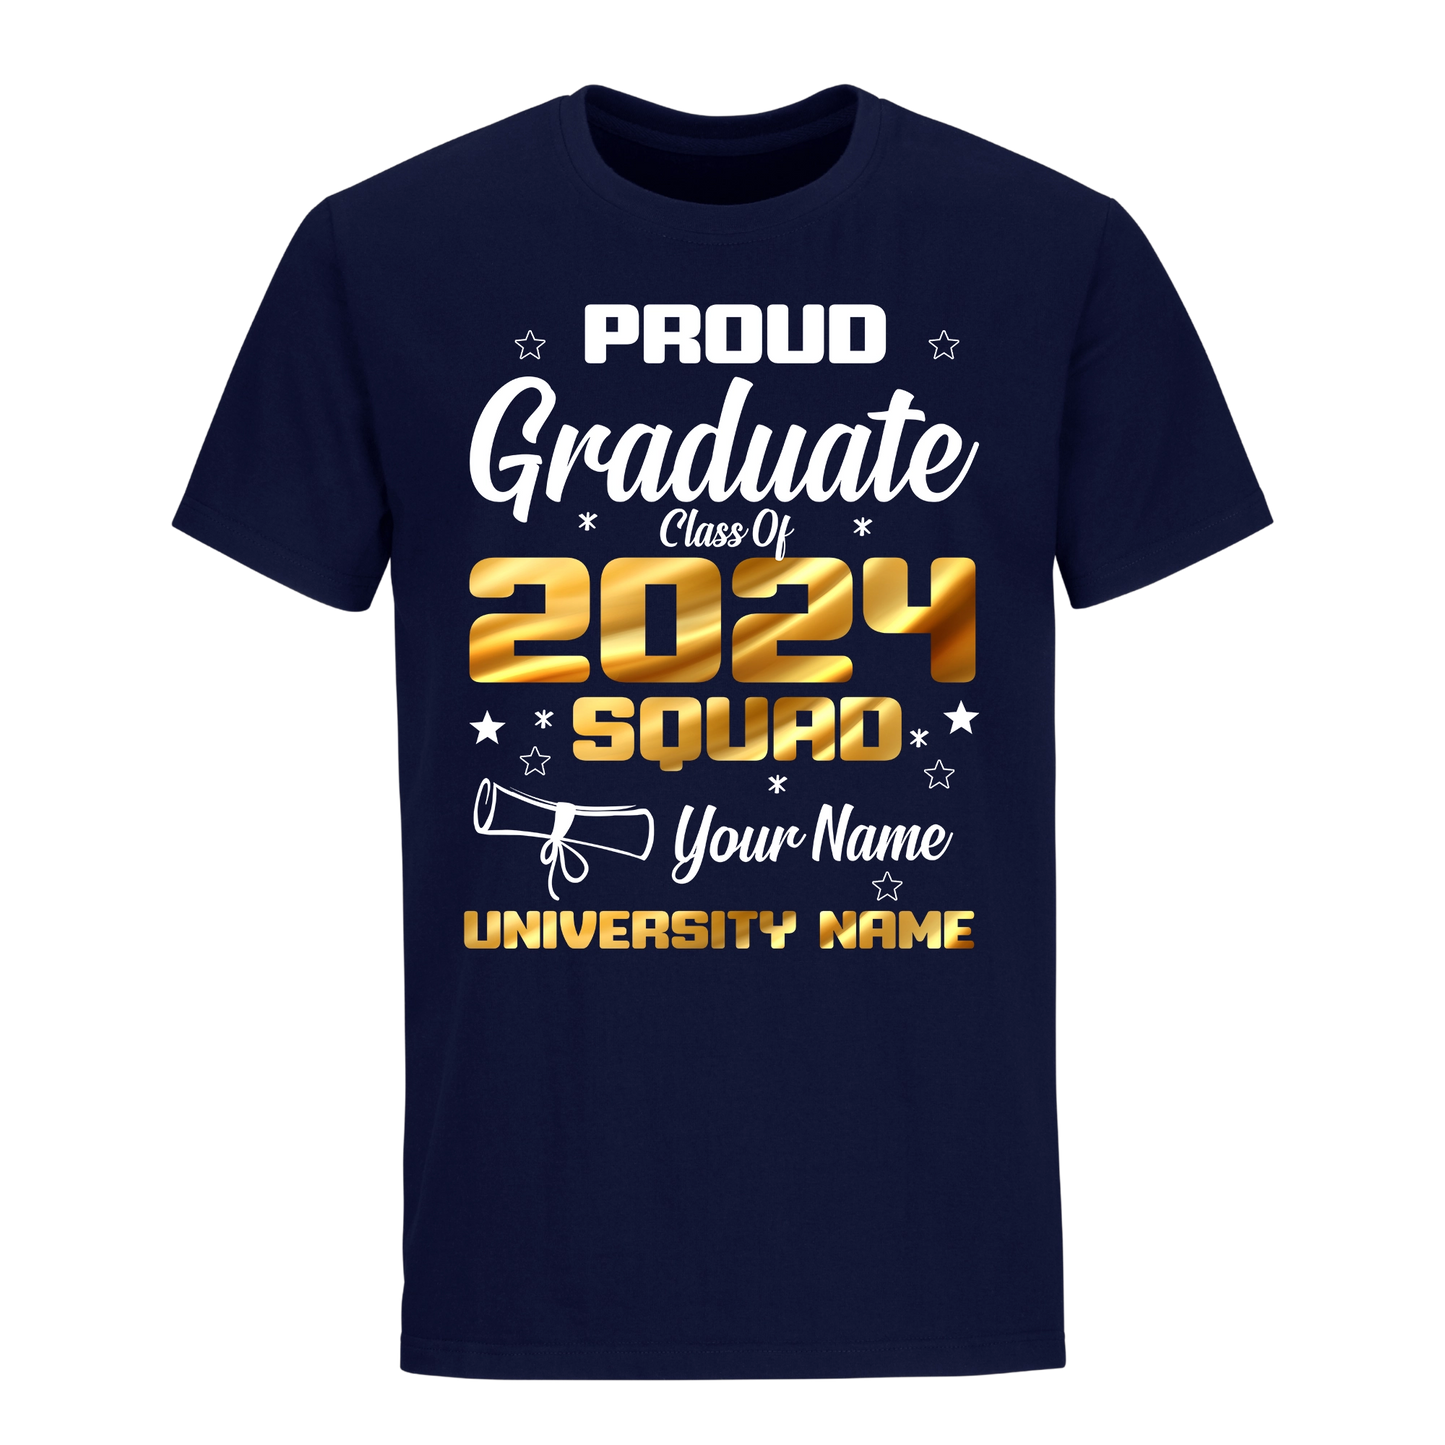 Proud Self Of A 2024 Graduate with Name Unisex Shirt D11